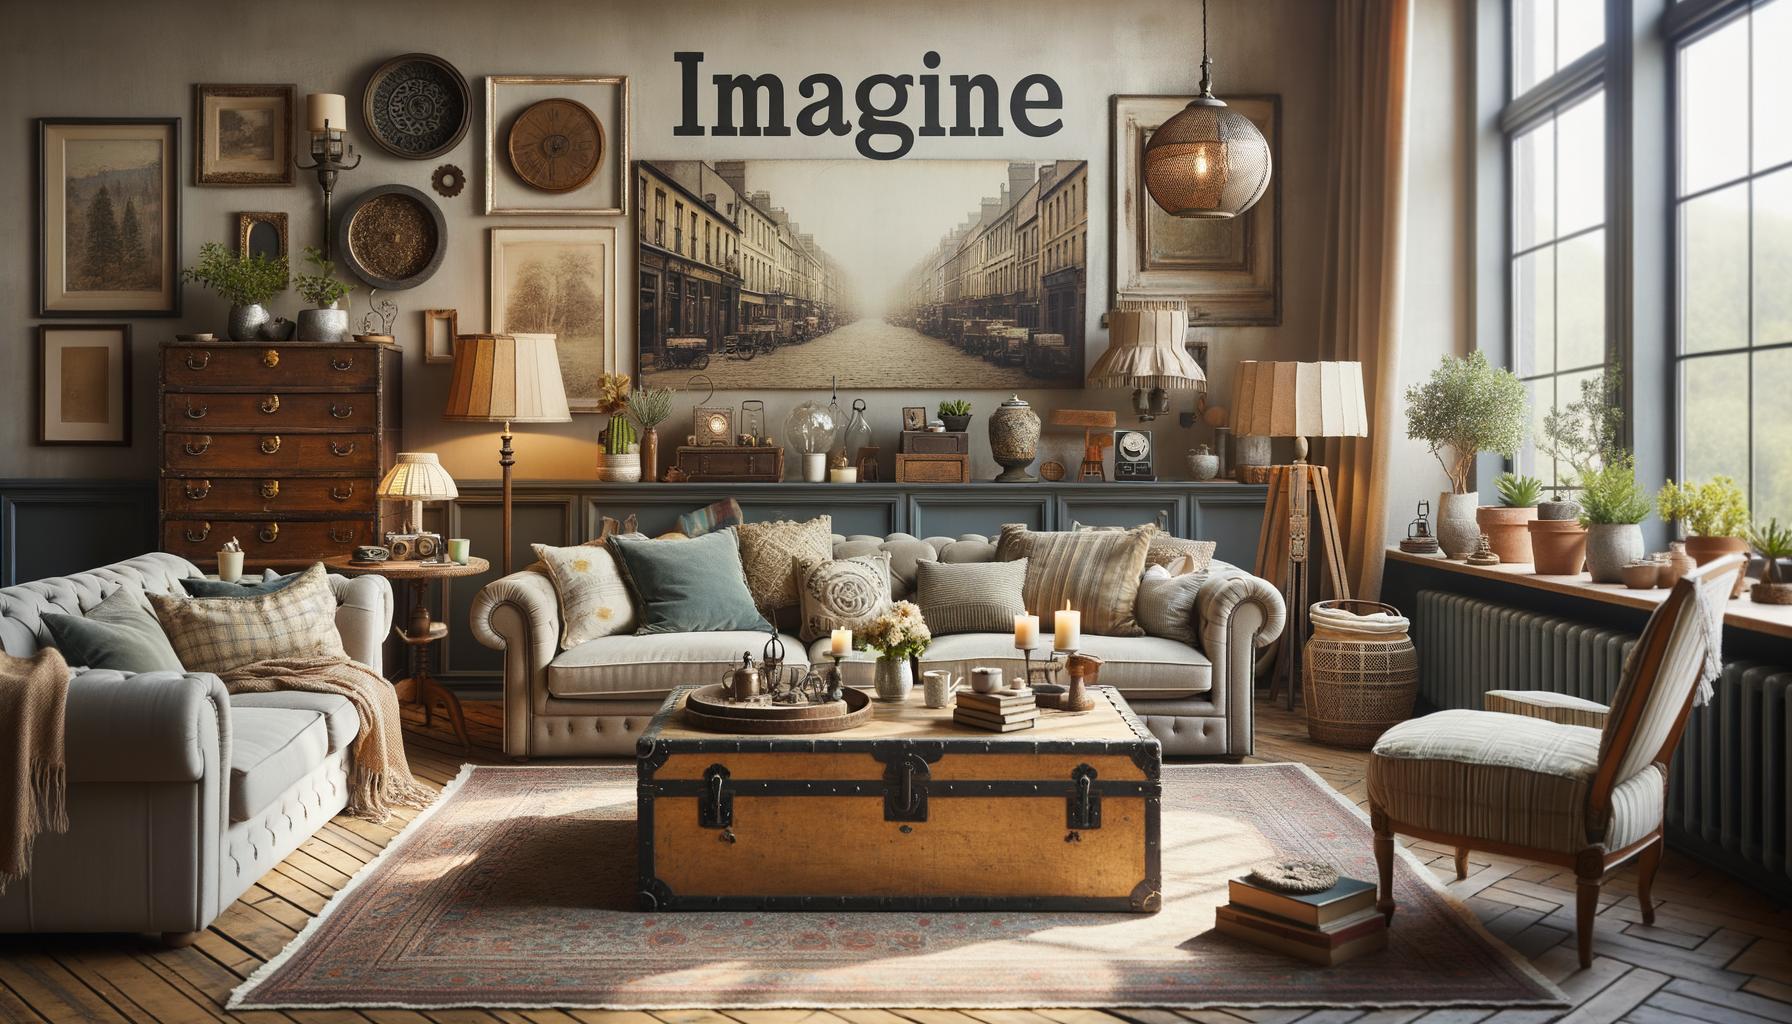 a cozy well-decorated living room with various items that look like they have been thrifted and upcycled.